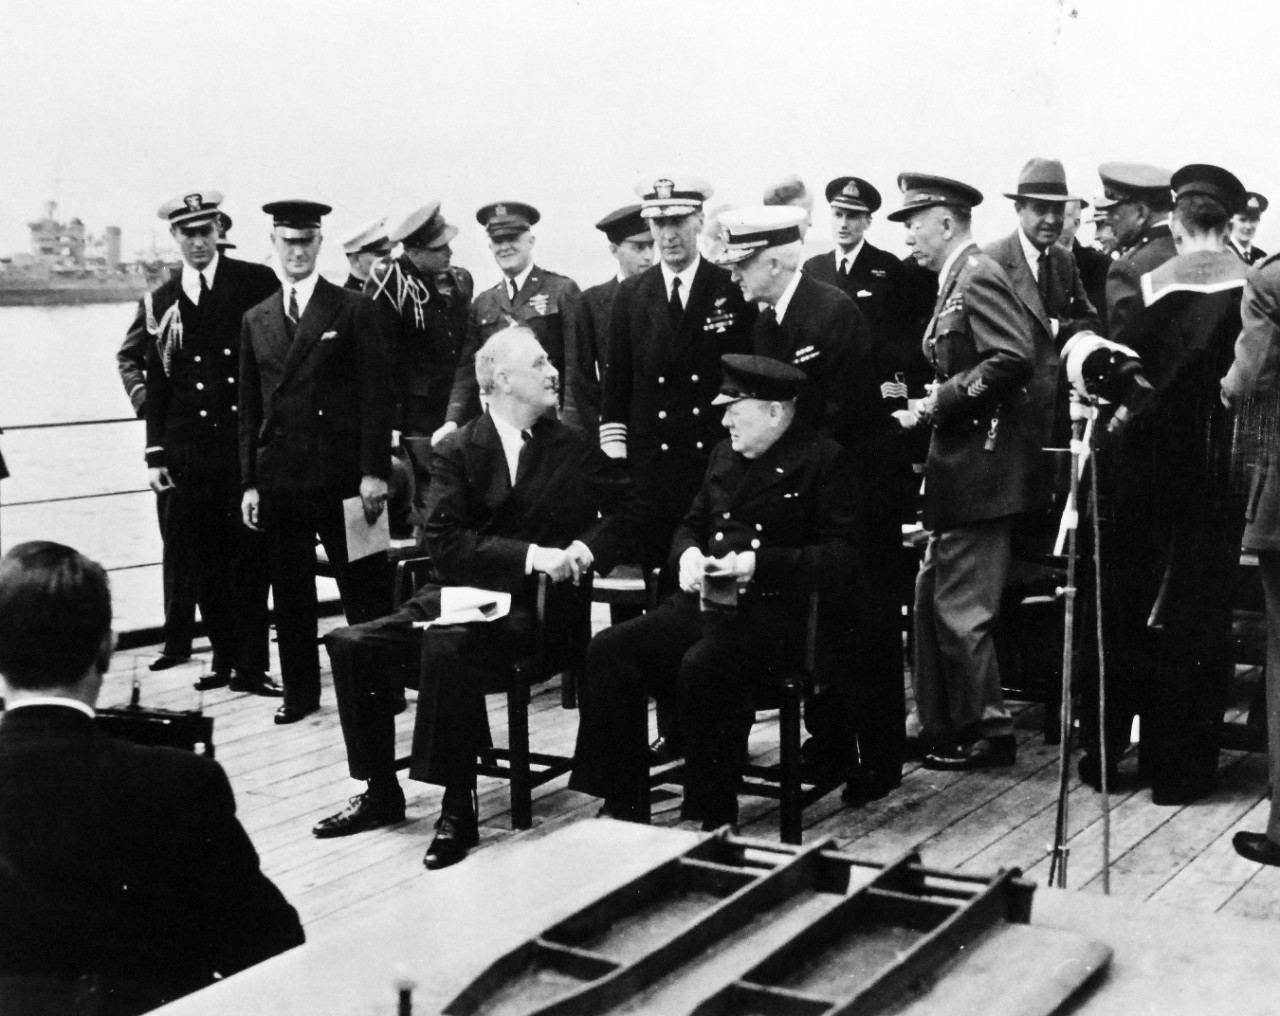 80-G-26864: Atlantic Charter, August 1941.  Informal group photograph including President Franklin D. Roosevelt and Prime Minister Winston S. Churchill on deck of HMS Prince of Wales following church services during the Atlantic Charter.  President Roosevelt is shown talking to Admiral Ernest J. King and Admiral Harold R. Stark.  Photograph released August 1941.   Official U.S. Navy Photograph, now in the collections of the National Archives.  (2016/03/22).